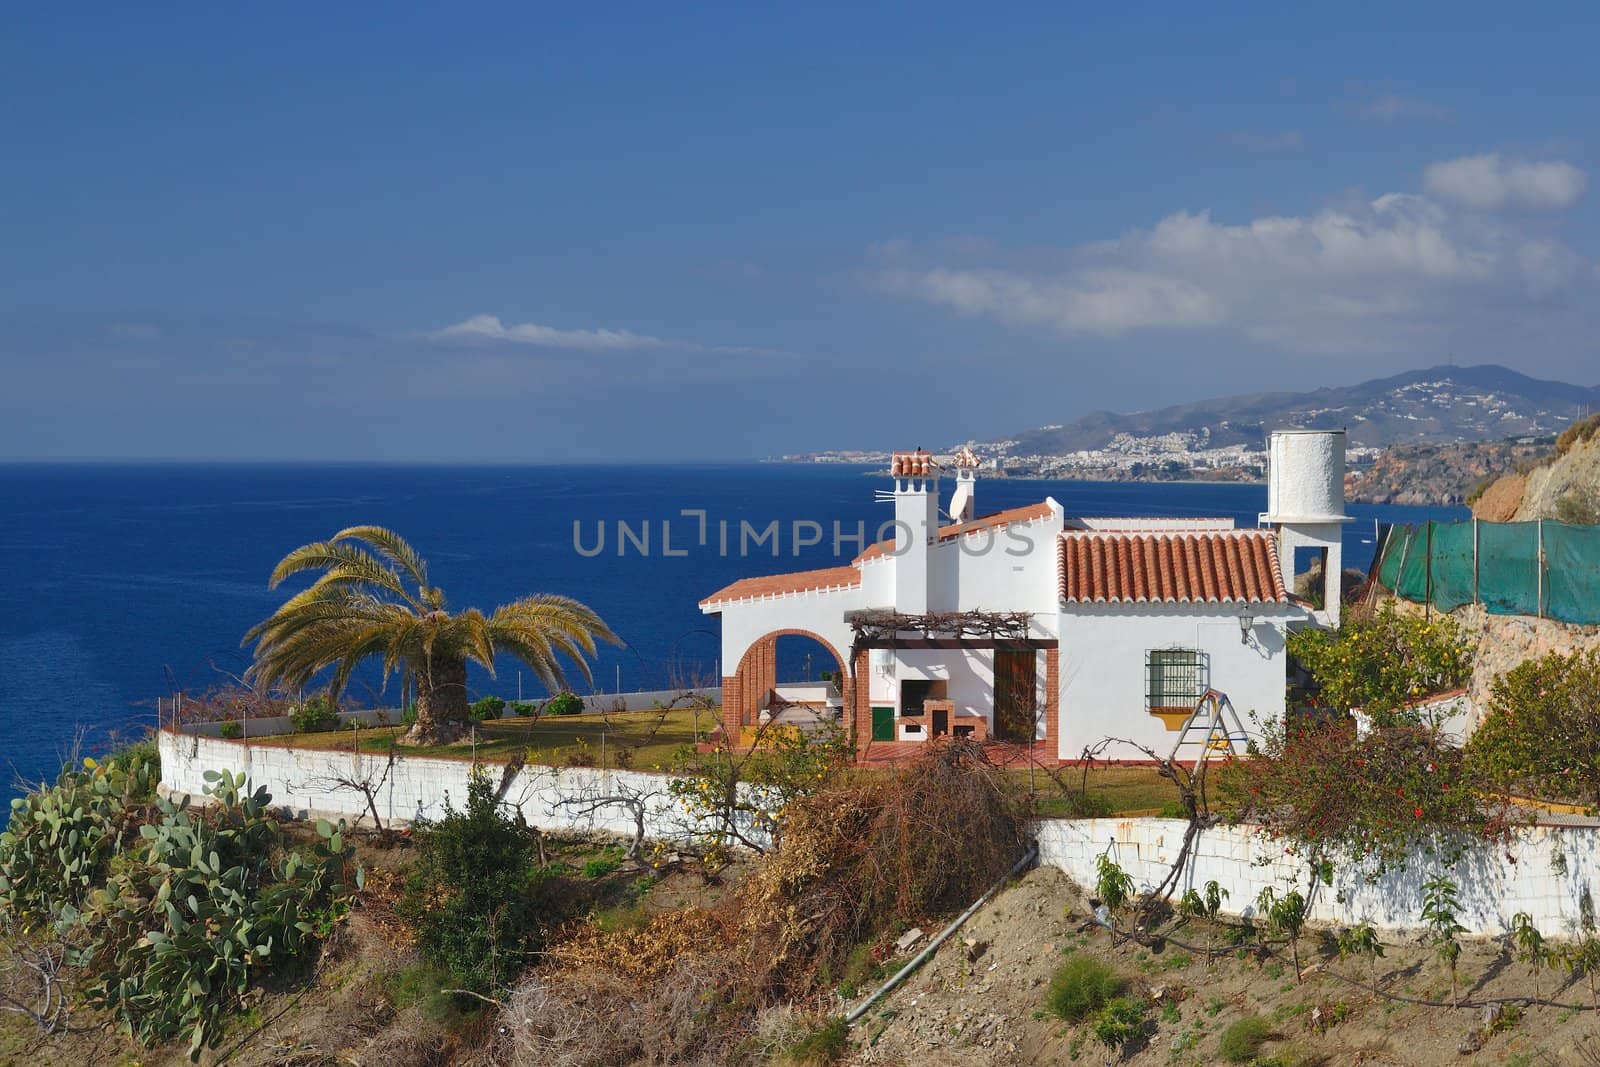 house on a cliff on the outskirts of Nerja